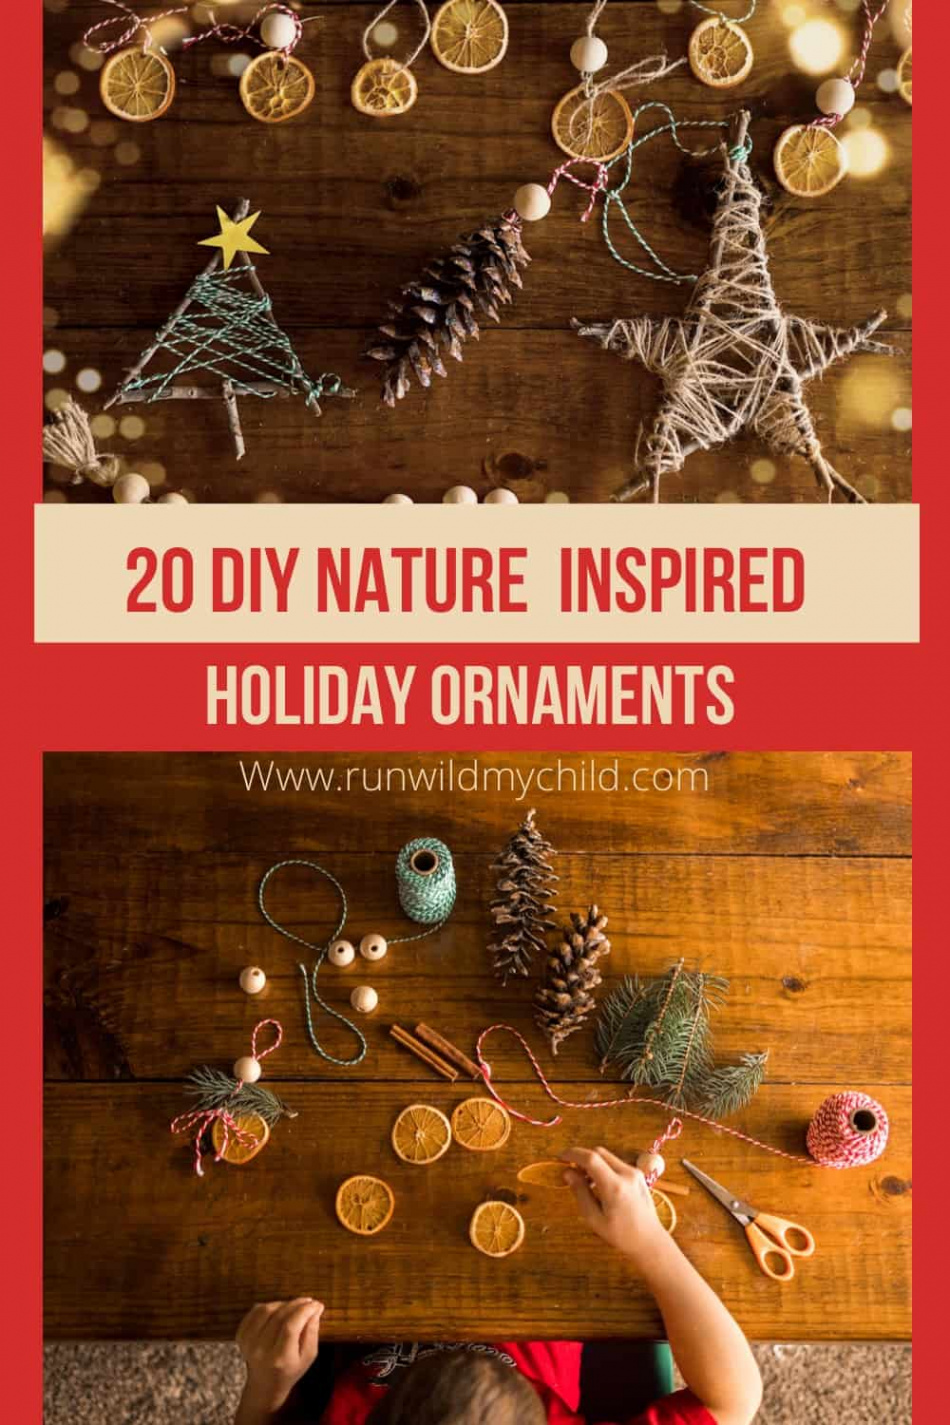 DIY Nature-Inspired Holiday Ornaments for Kids